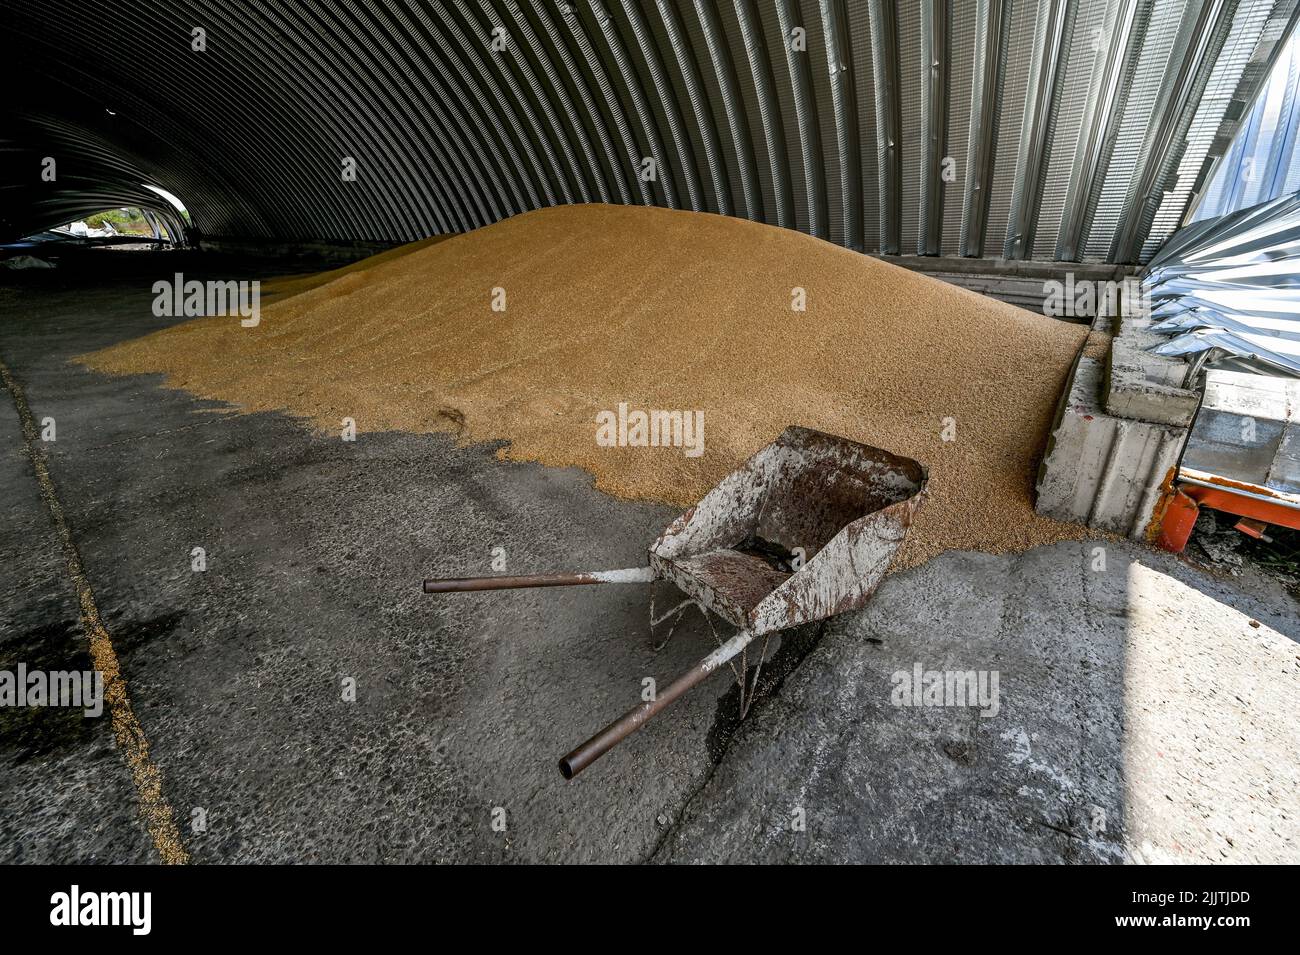 ZAPORIZHZHIA REGION, UKRAINE - JULY 27, 2022 - The premises of an agricultural enterprise show damage caused by the missile attack of the Russian troo Stock Photo